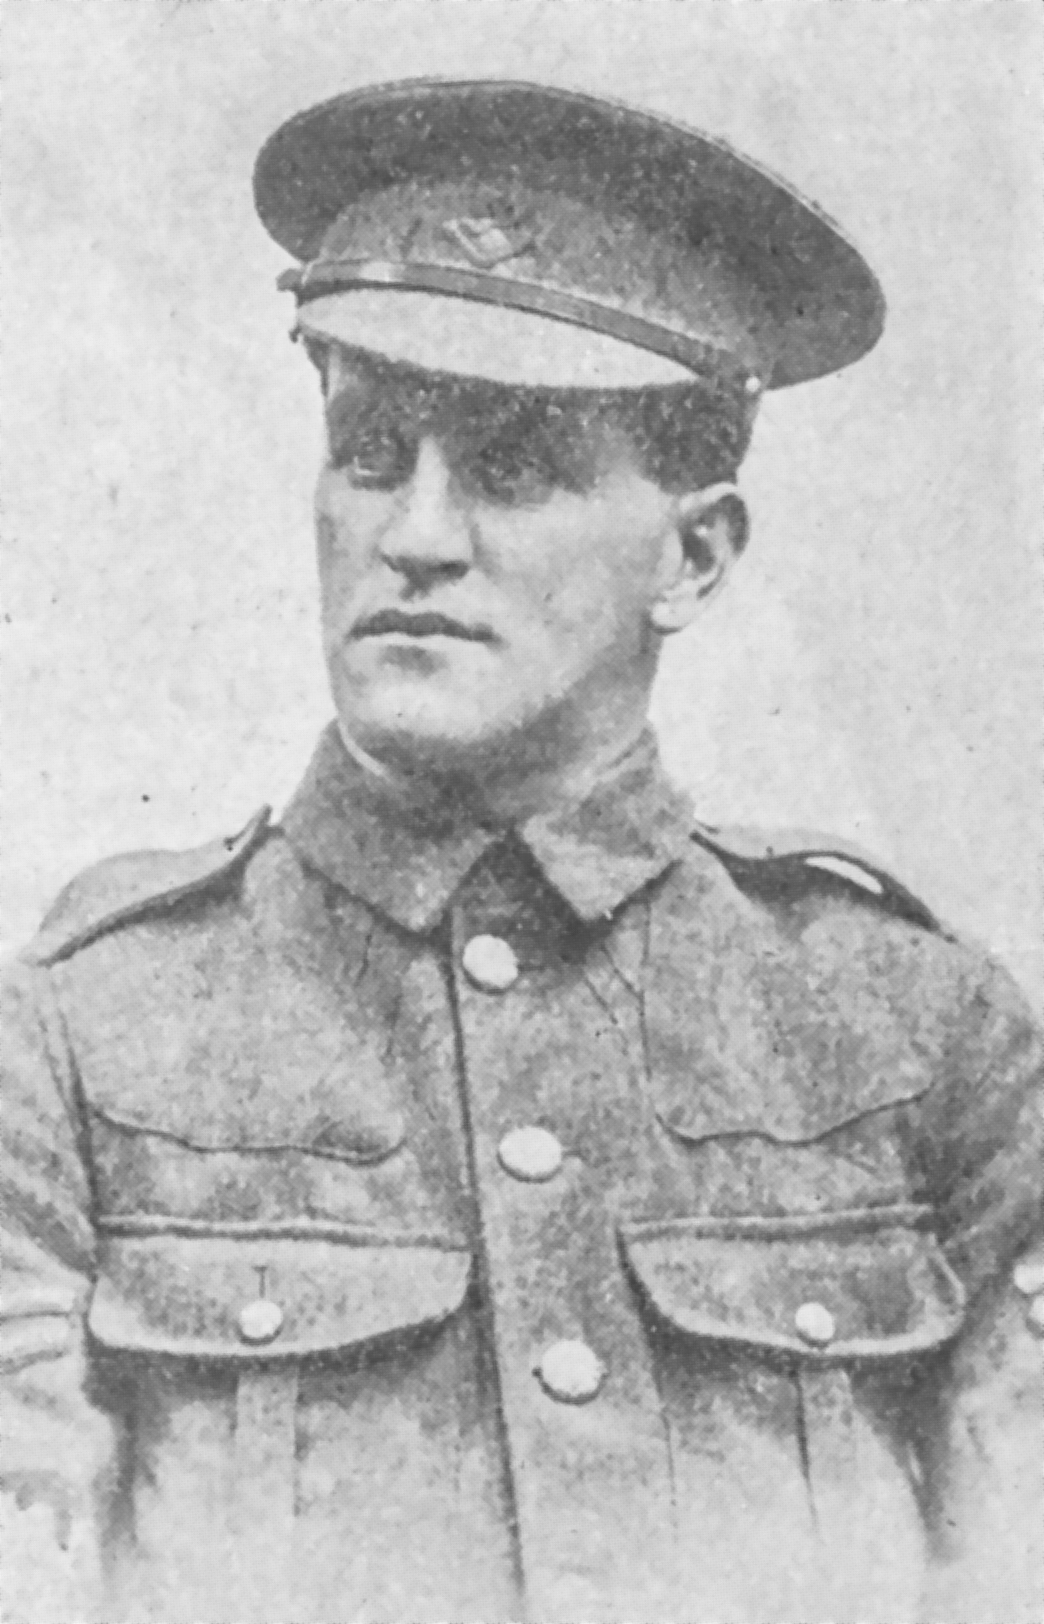 Black and white archival photograph of a man in a uniform wearing a peaked cap.